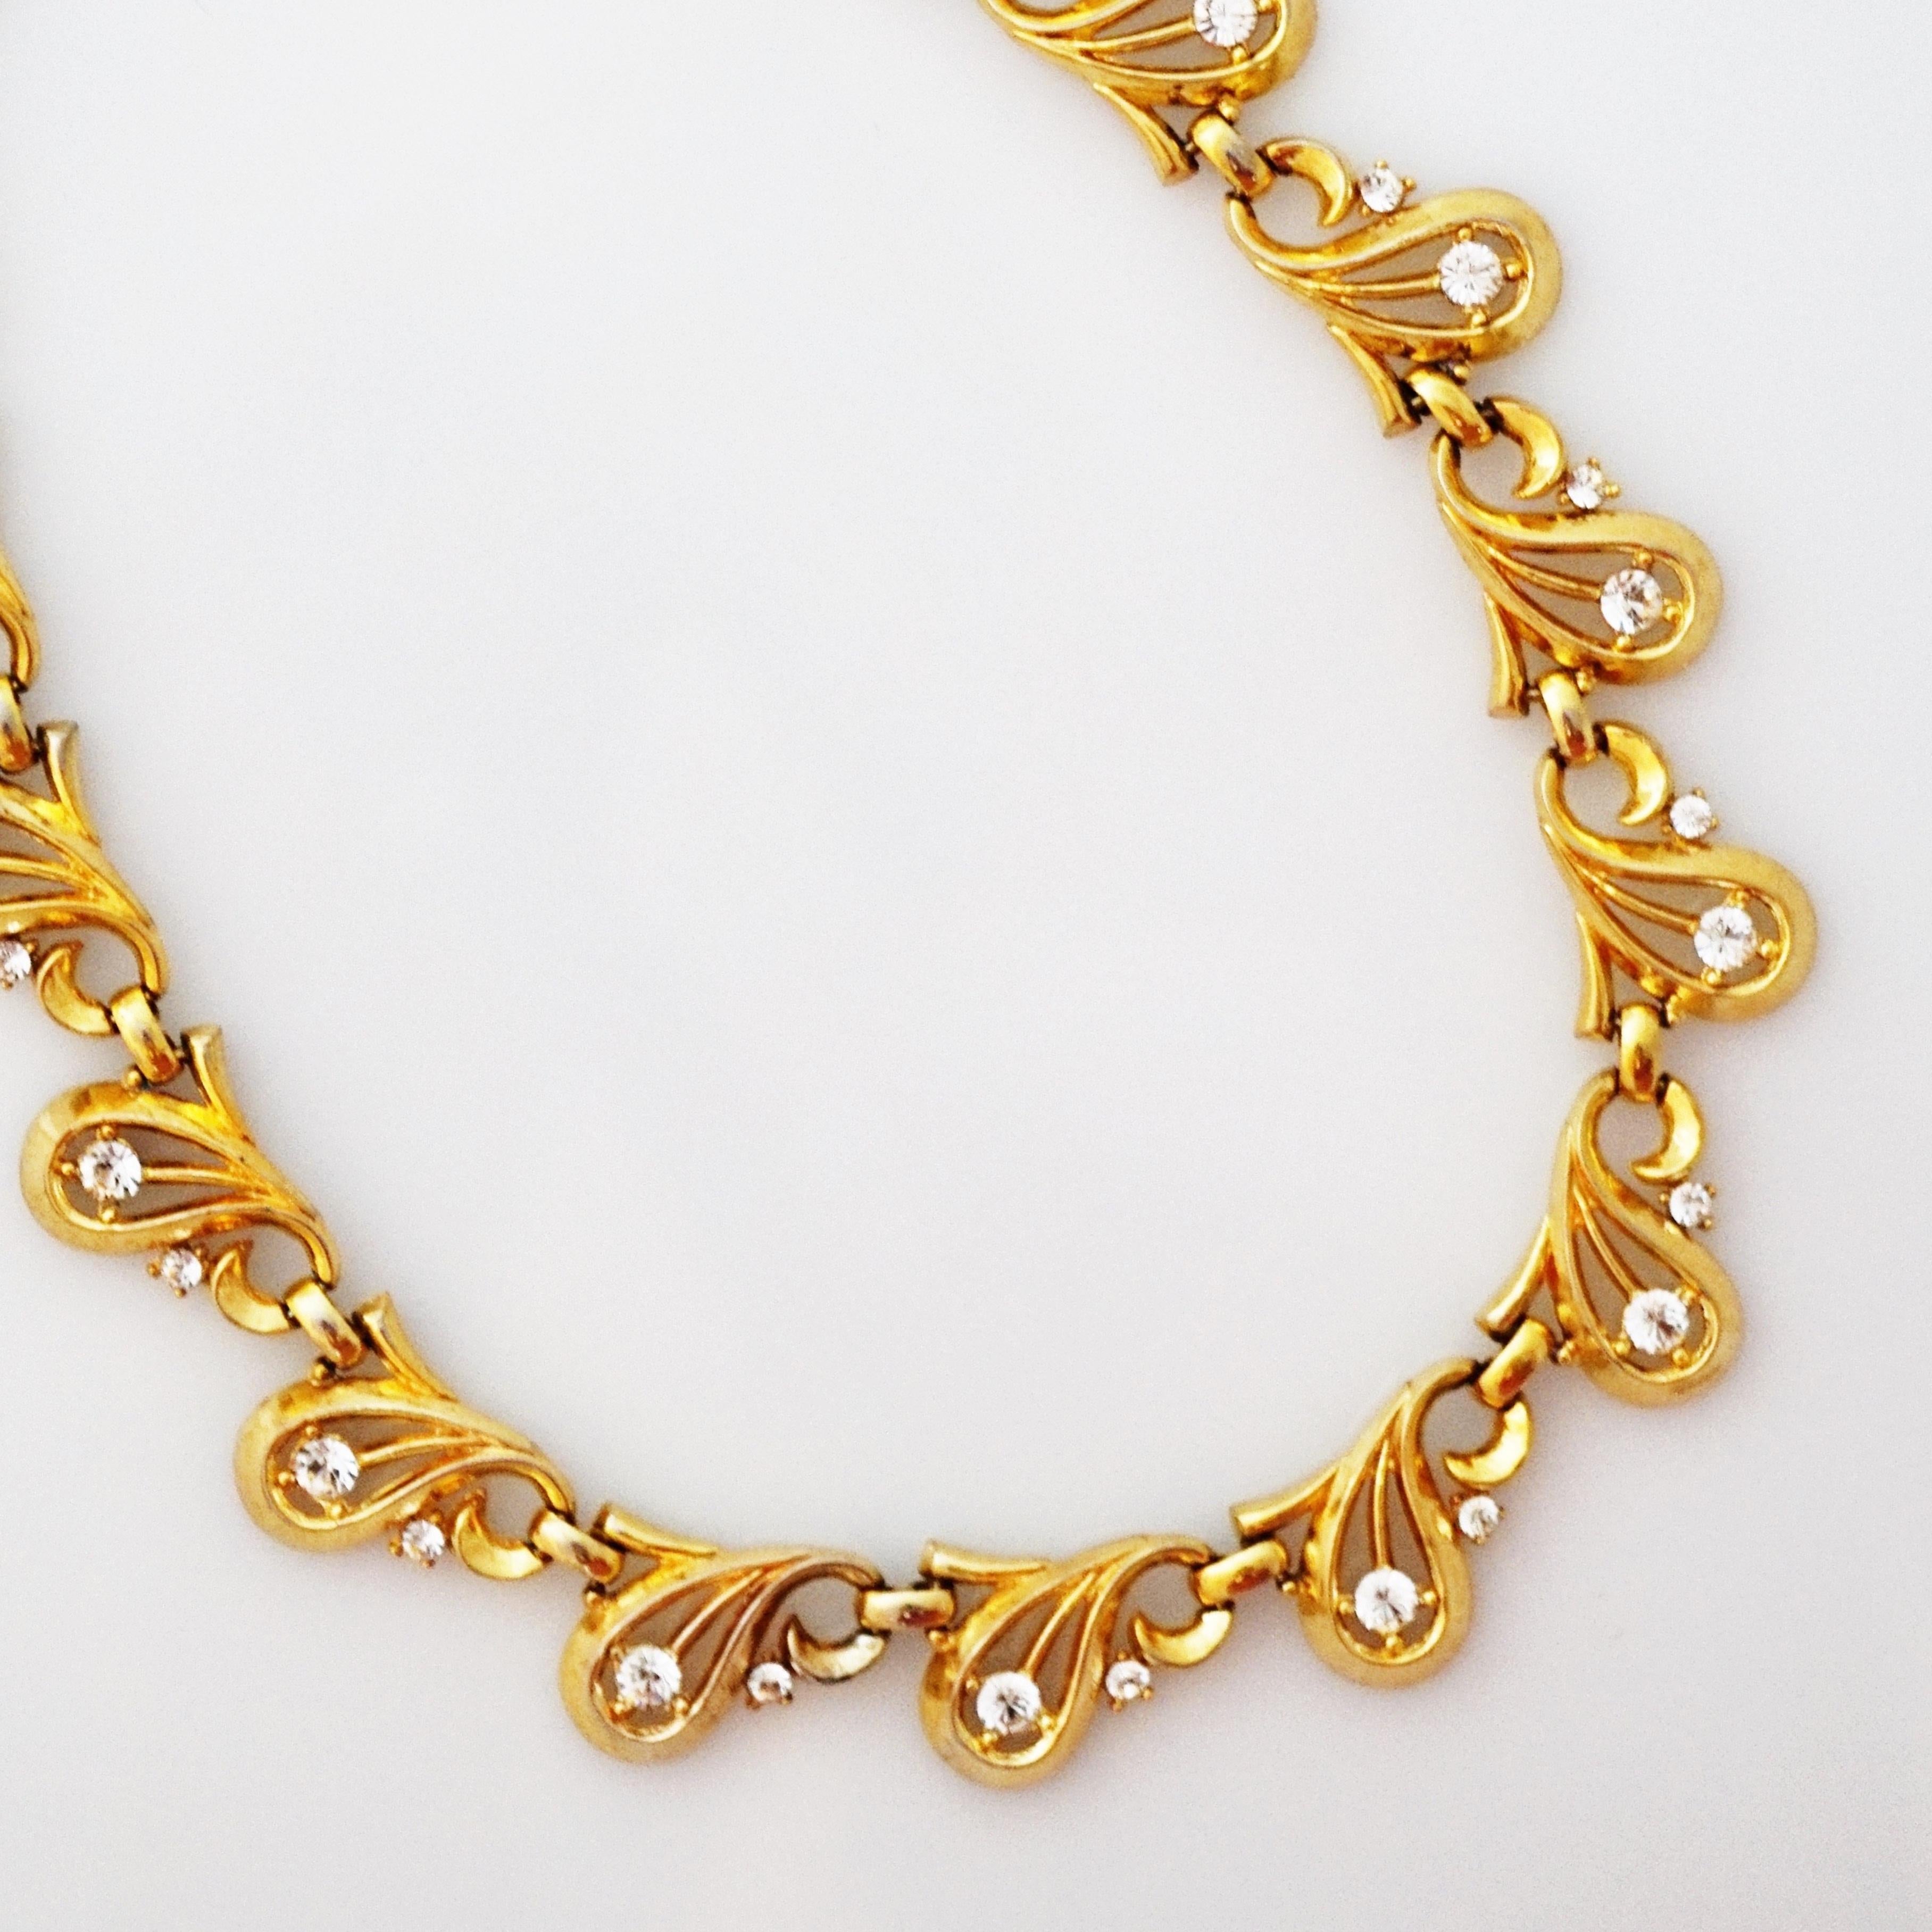 1940s Art Nouveau Teardrop Link Choker Necklace By Alfred Philippe For Trifari In Good Condition For Sale In McKinney, TX